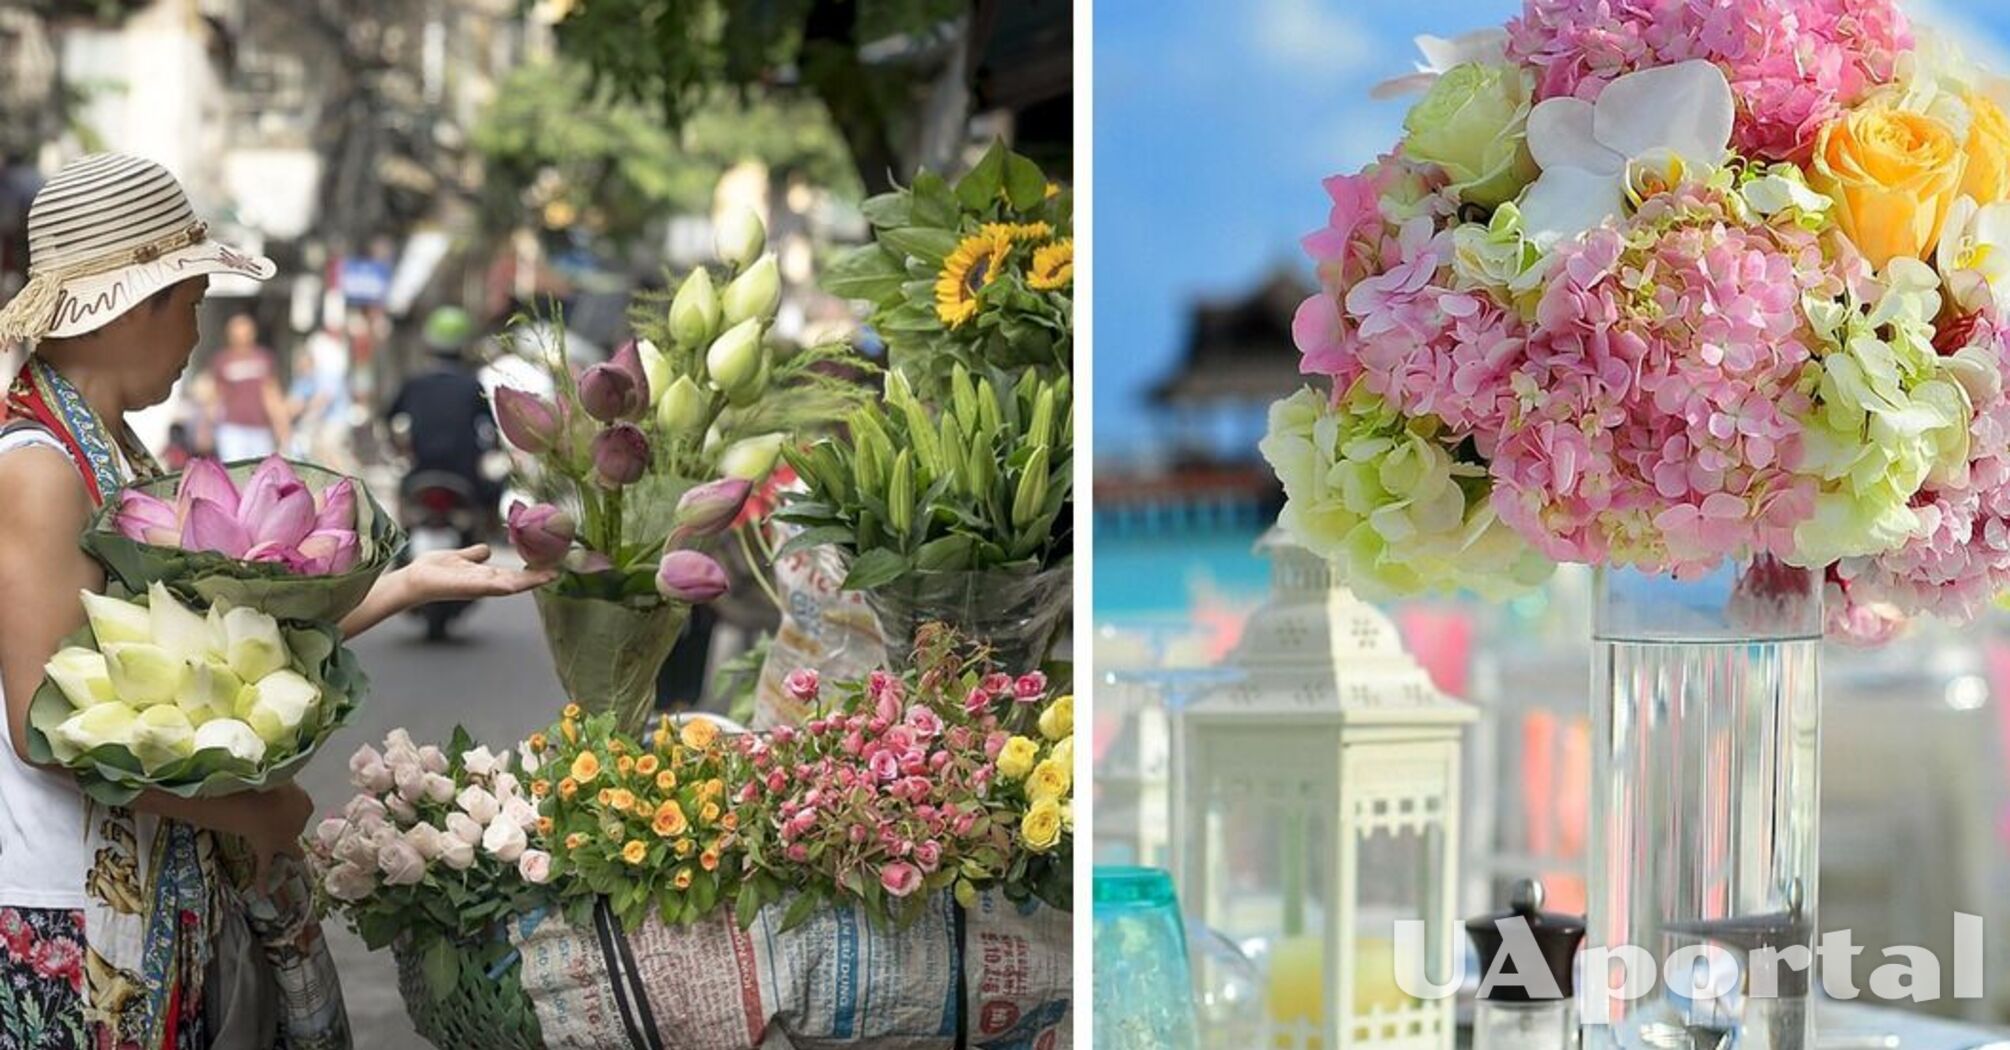 What to do to keep flowers in a vase 'alive' for as long as possible: florists' tips